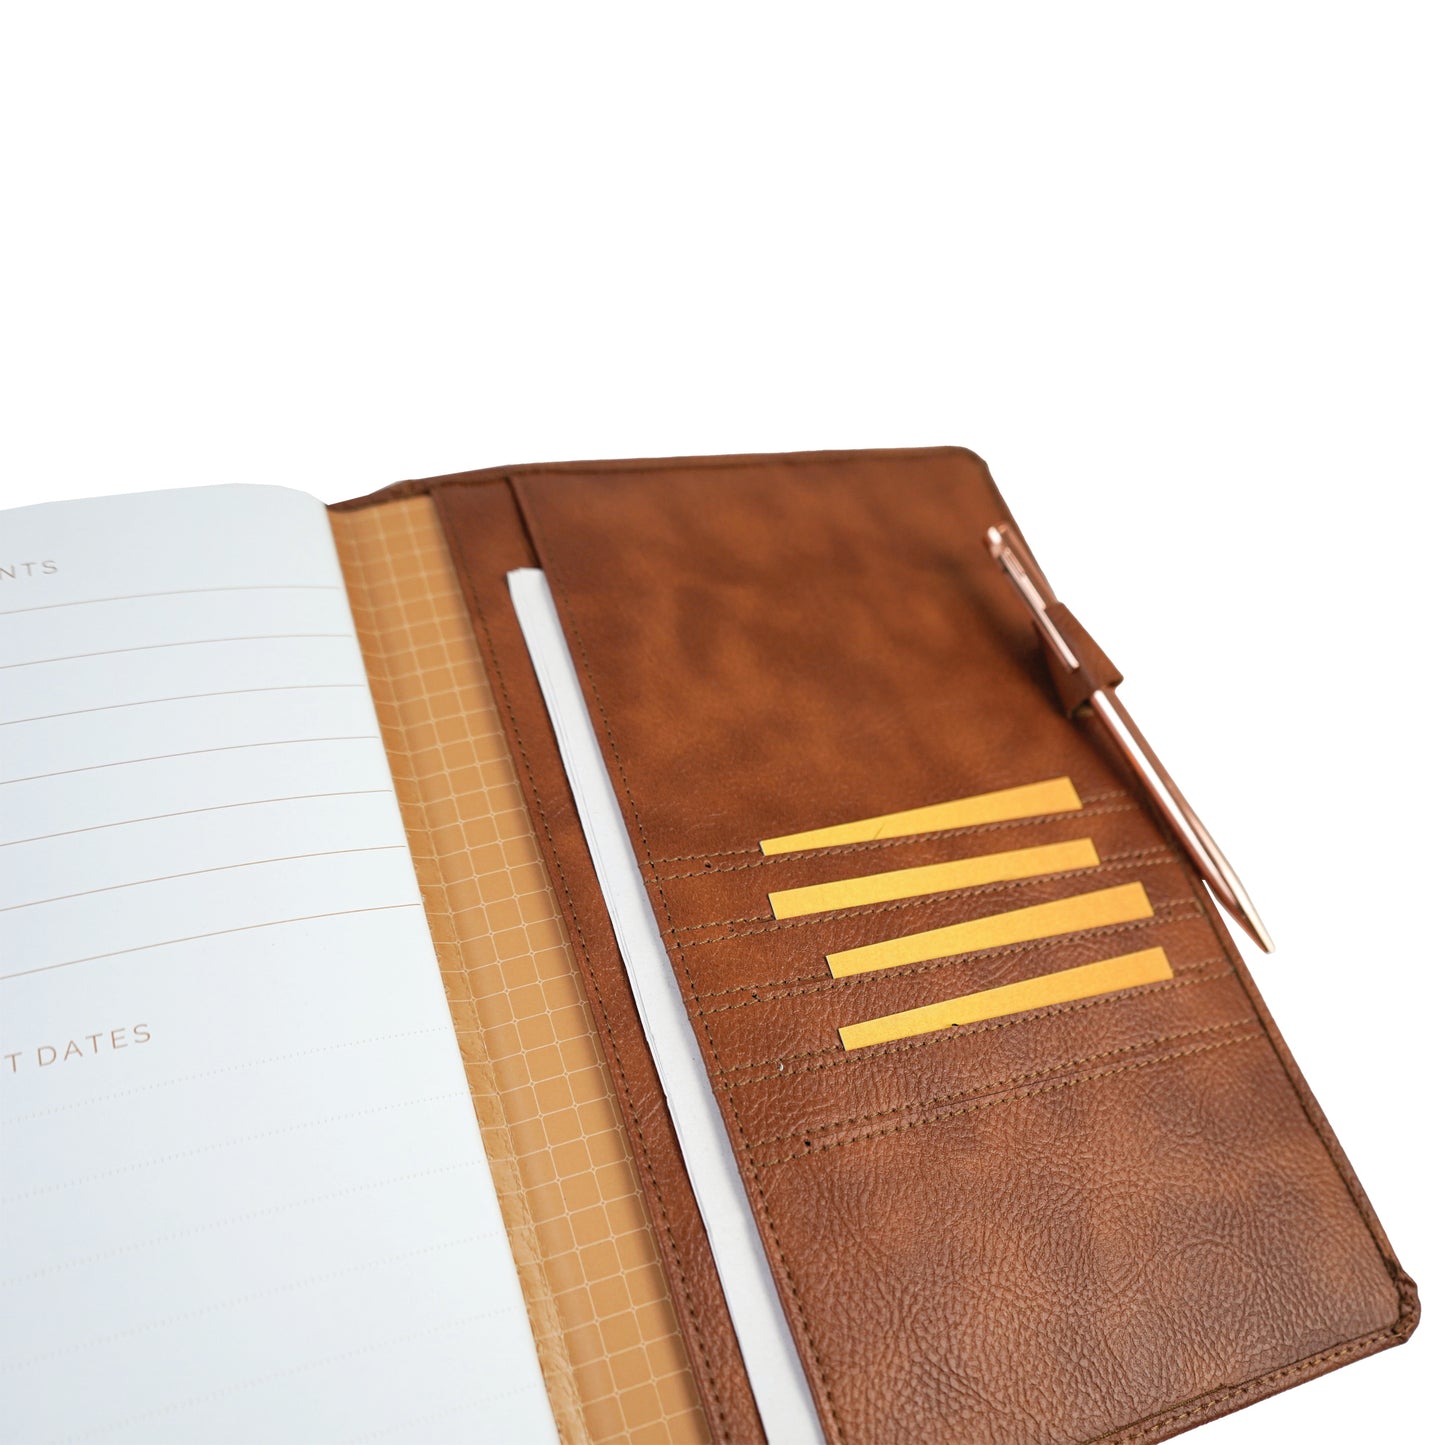 Pragya Refillable A5 Leather Travel Journal Organizer with Pockets and Pen Holder